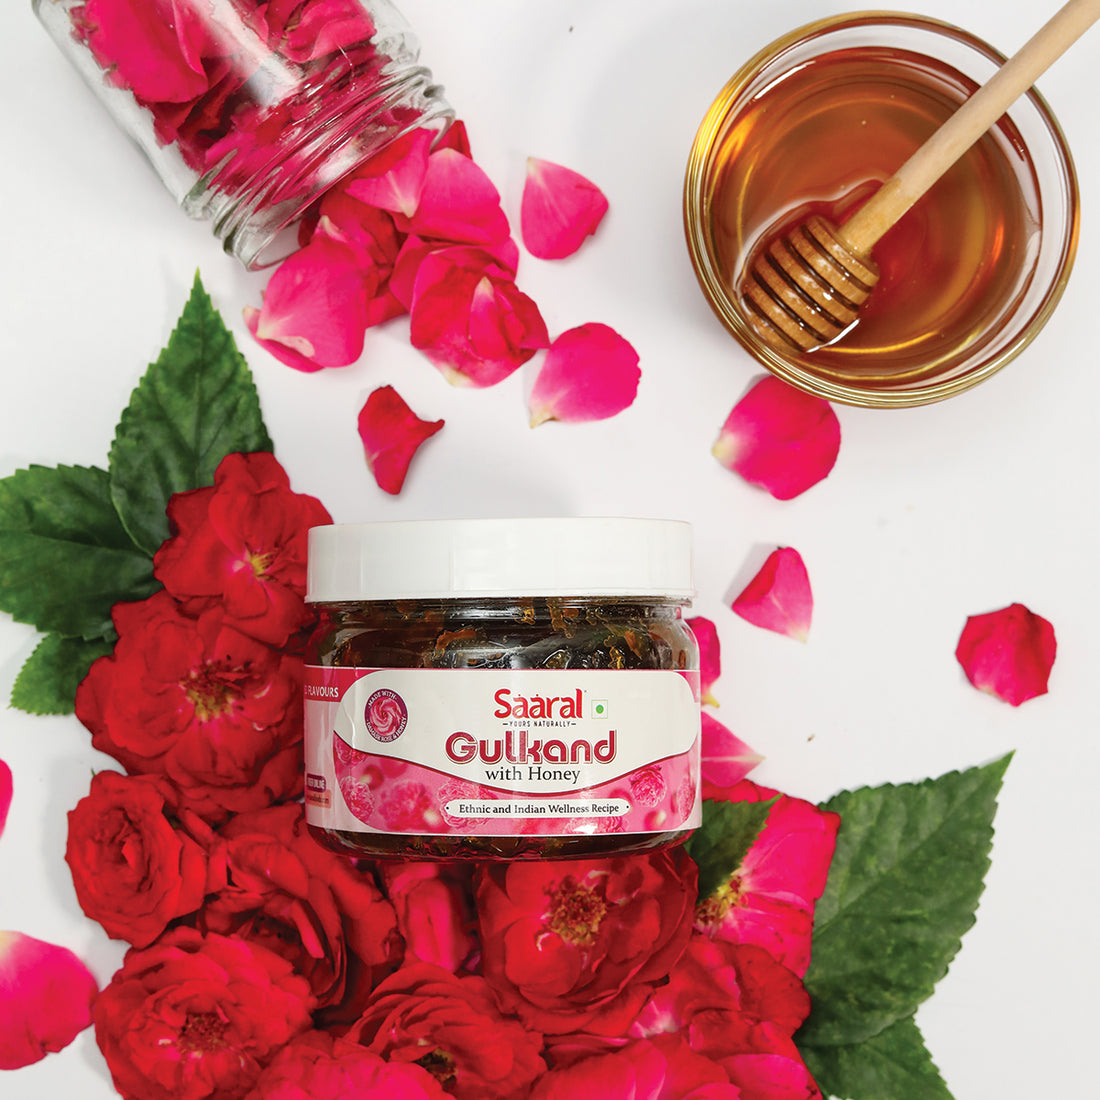 The magical beauty benefits of rose petals - Times of India